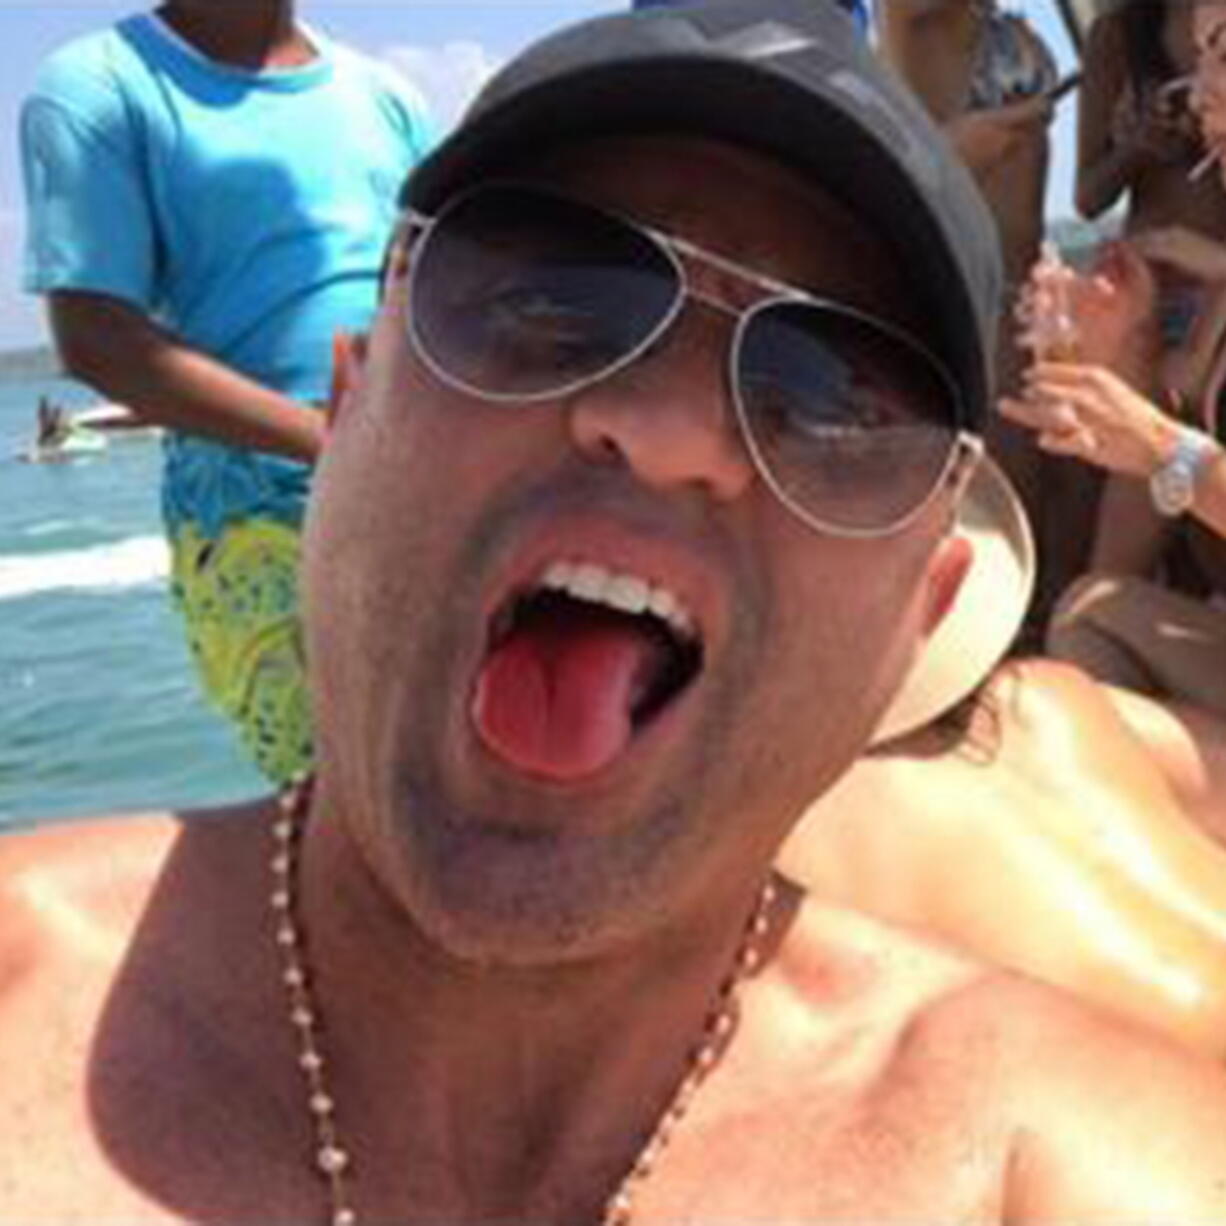 This photo obtained by The Associated Press shows Jose Irizarry in Cartagena, Colombia, in 2017. Irizarry accepts he's the most corrupt agent in U.S. Drug Enforcement Administration history, admitting he conspired with Colombian cartels to build a lavish lifestyle. But he says he won't take the rap alone, accusing long-trusted DEA colleagues of joining him in skimming millions from money laundering stings to fund a decade's worth of high living.